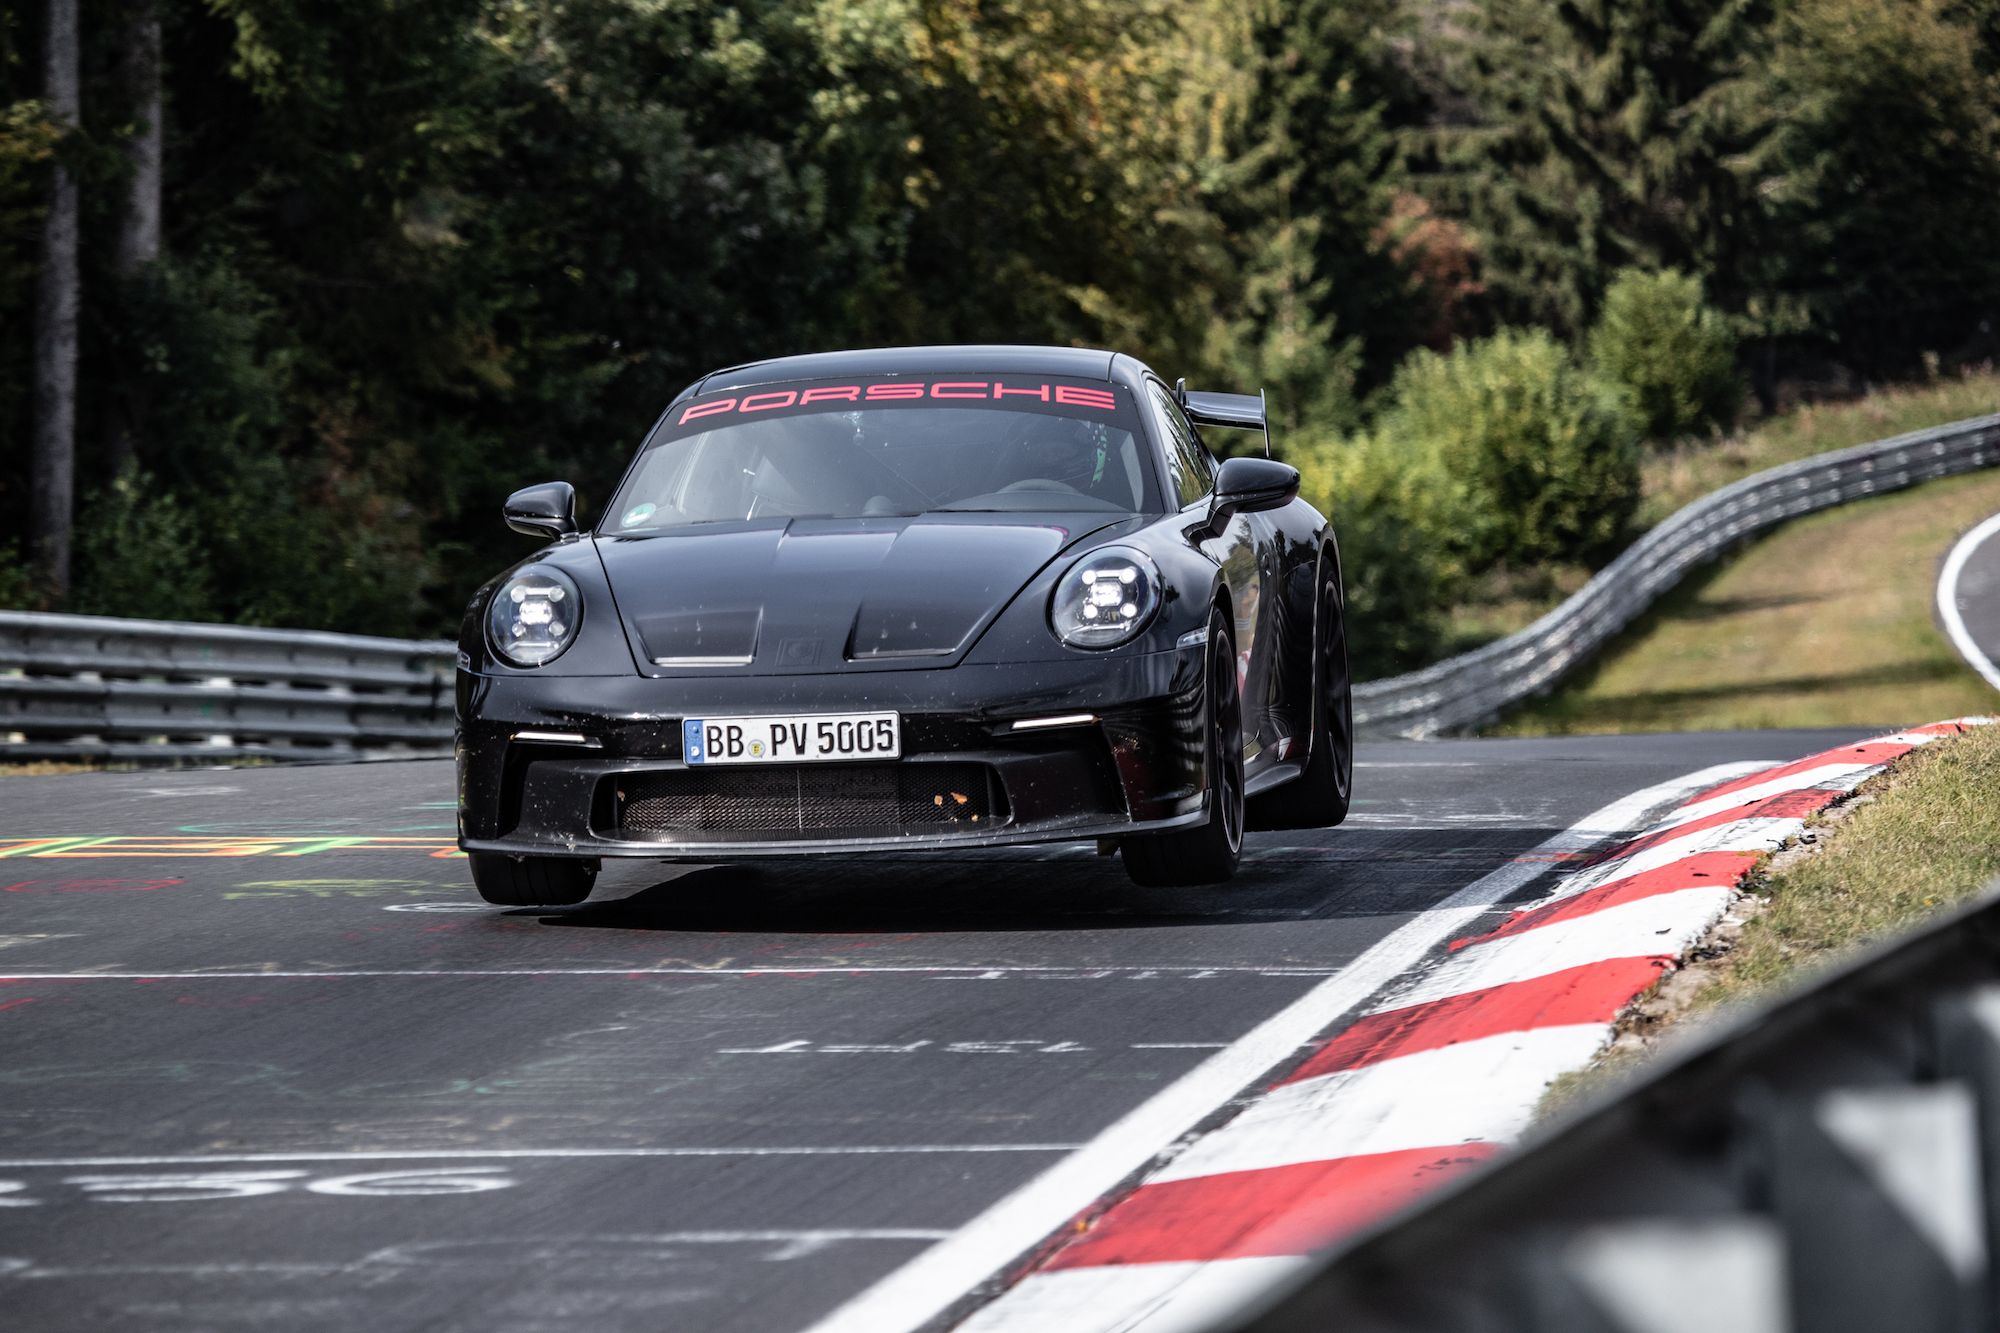 How The 2022 Porsche 911 Gt3 Laps The Nurburgring Quicker Than A 918 Spyder